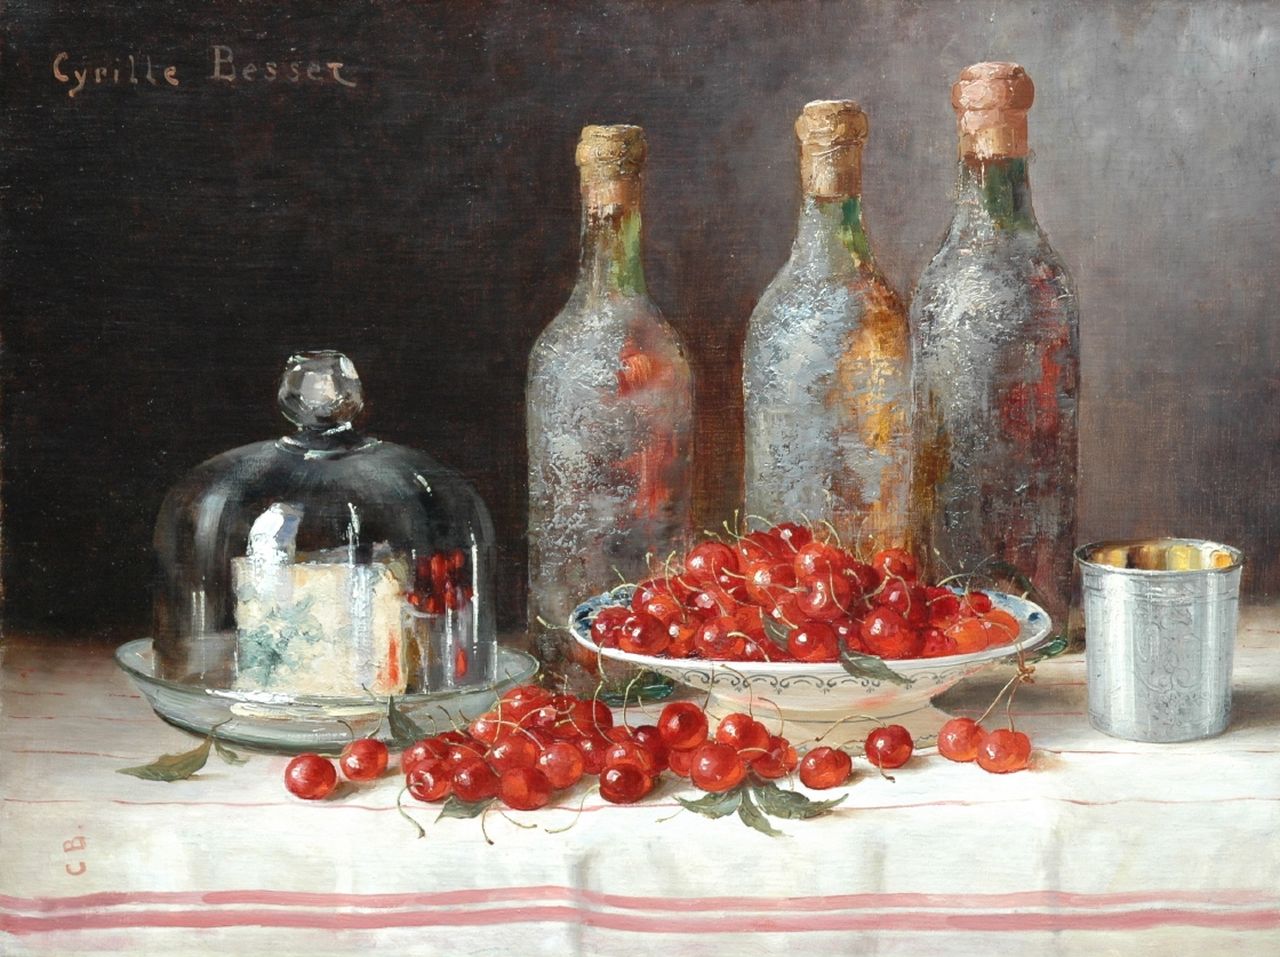 Cyrille Besset | A still life with bottles, cheese and cherries, Öl auf Leinwand, 49,4 x 65,0 cm, signed u.l. and l.l. with initials